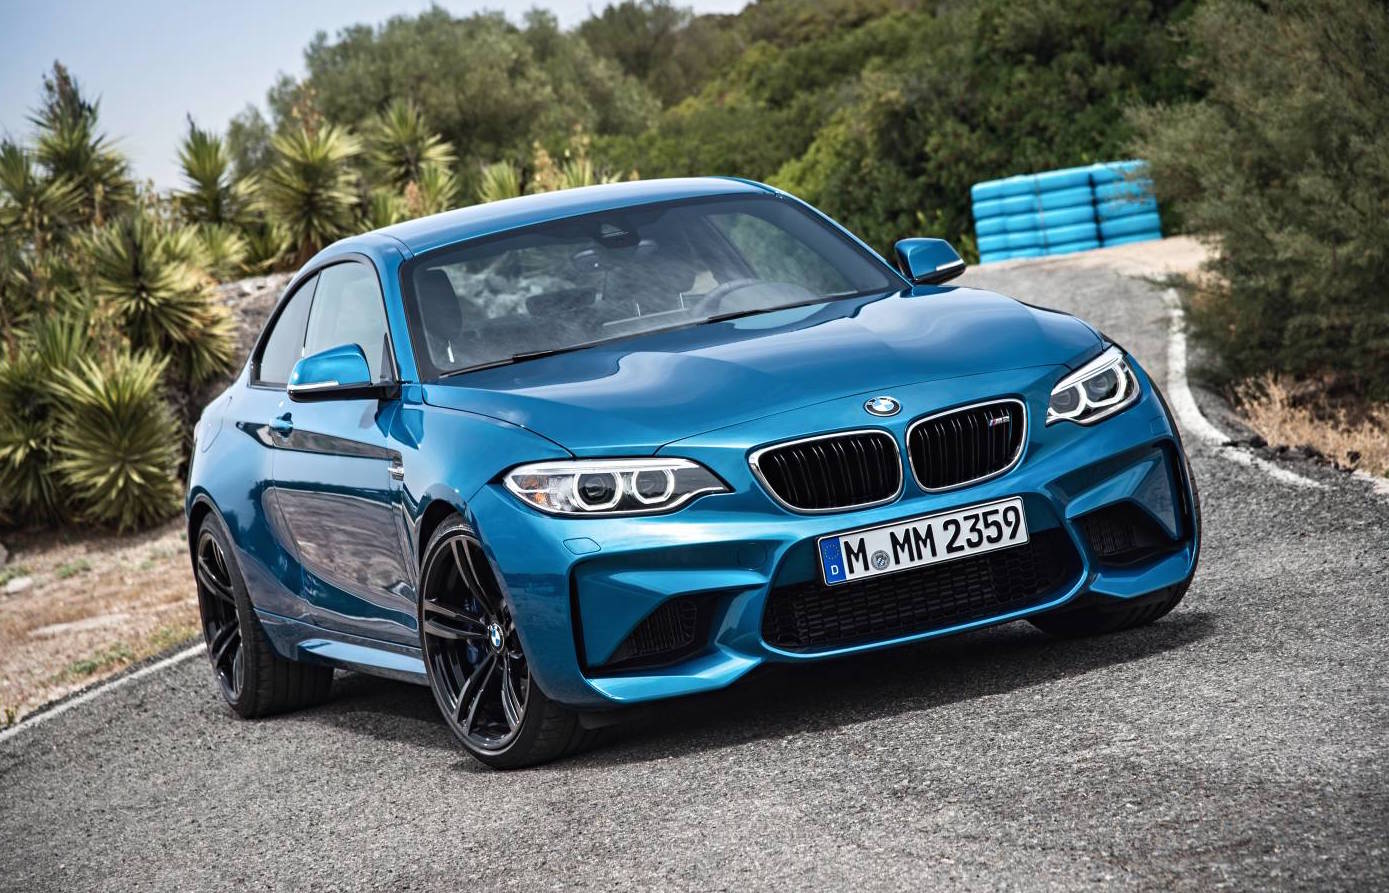 2015 Bmw M2 Price | 2017 - 2018 Best Cars Reviews